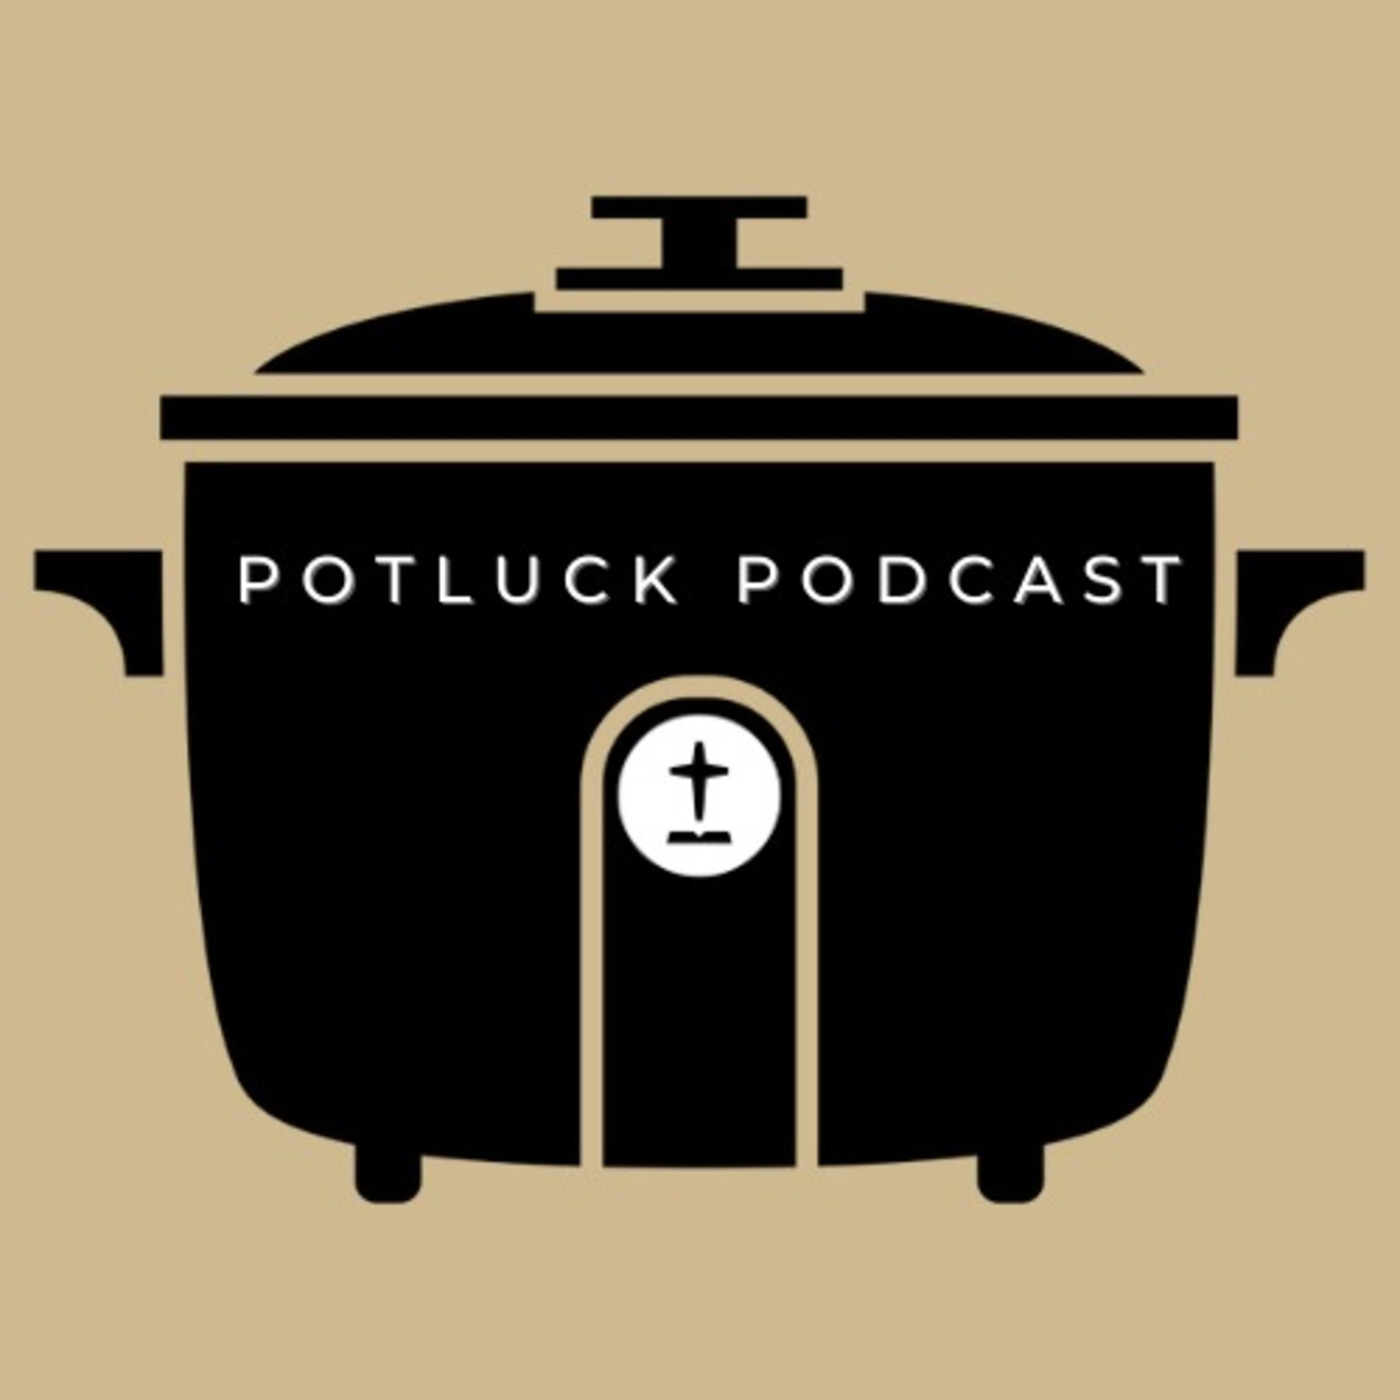 Episode 286: POTLUCK PODCAST 201: T4G, Baptism Sunday, and President Panel